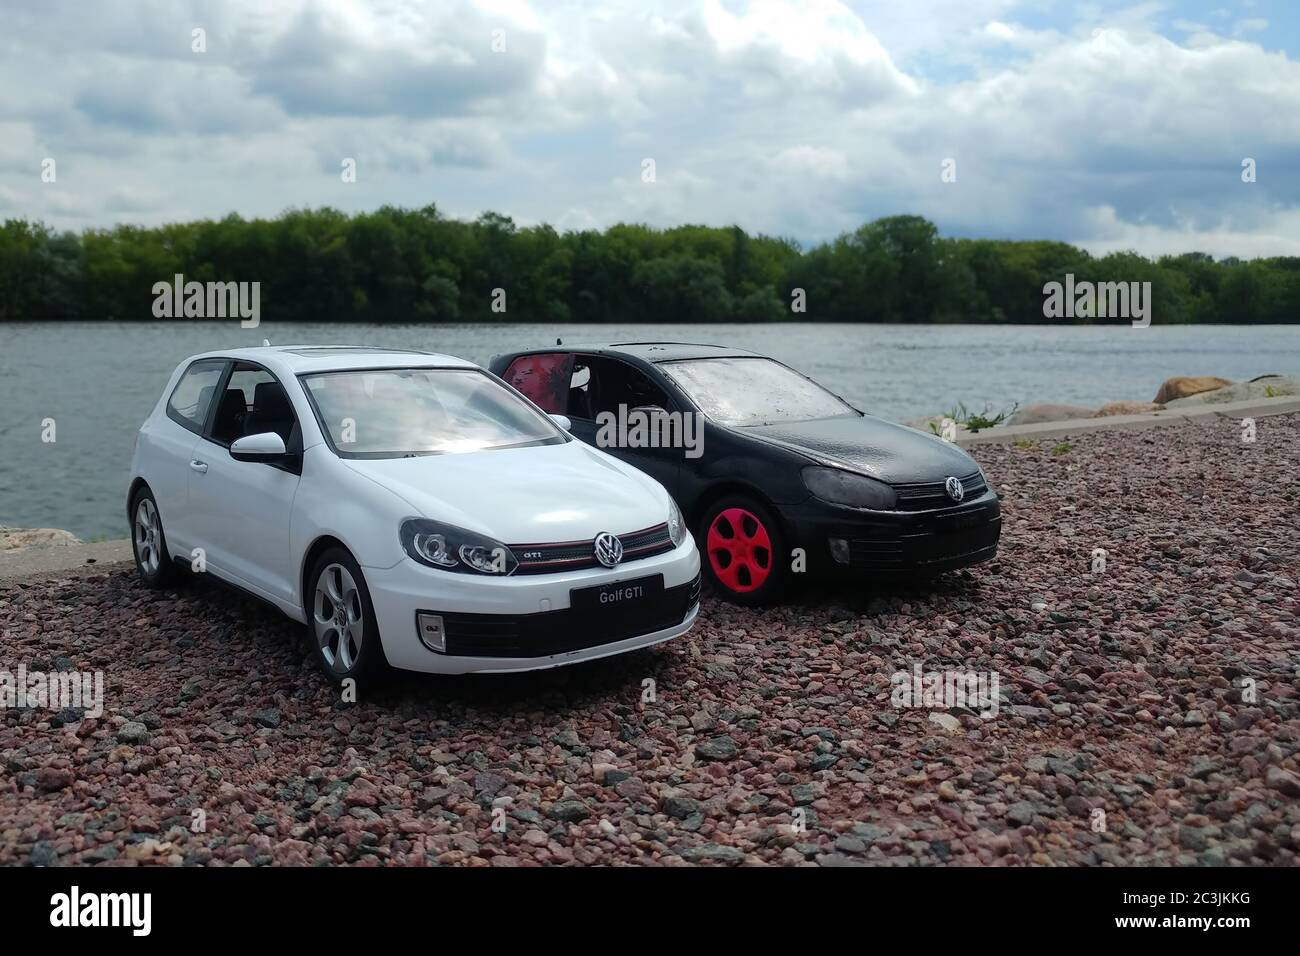 Moscow, Russia - May 03, 2019: Two toy cars in river park. 2 Volkswagen golf mk6 stand on a pebble beach. White and black GTI stand next to each other. Moscow river, Kolomenskoe Stock Photo